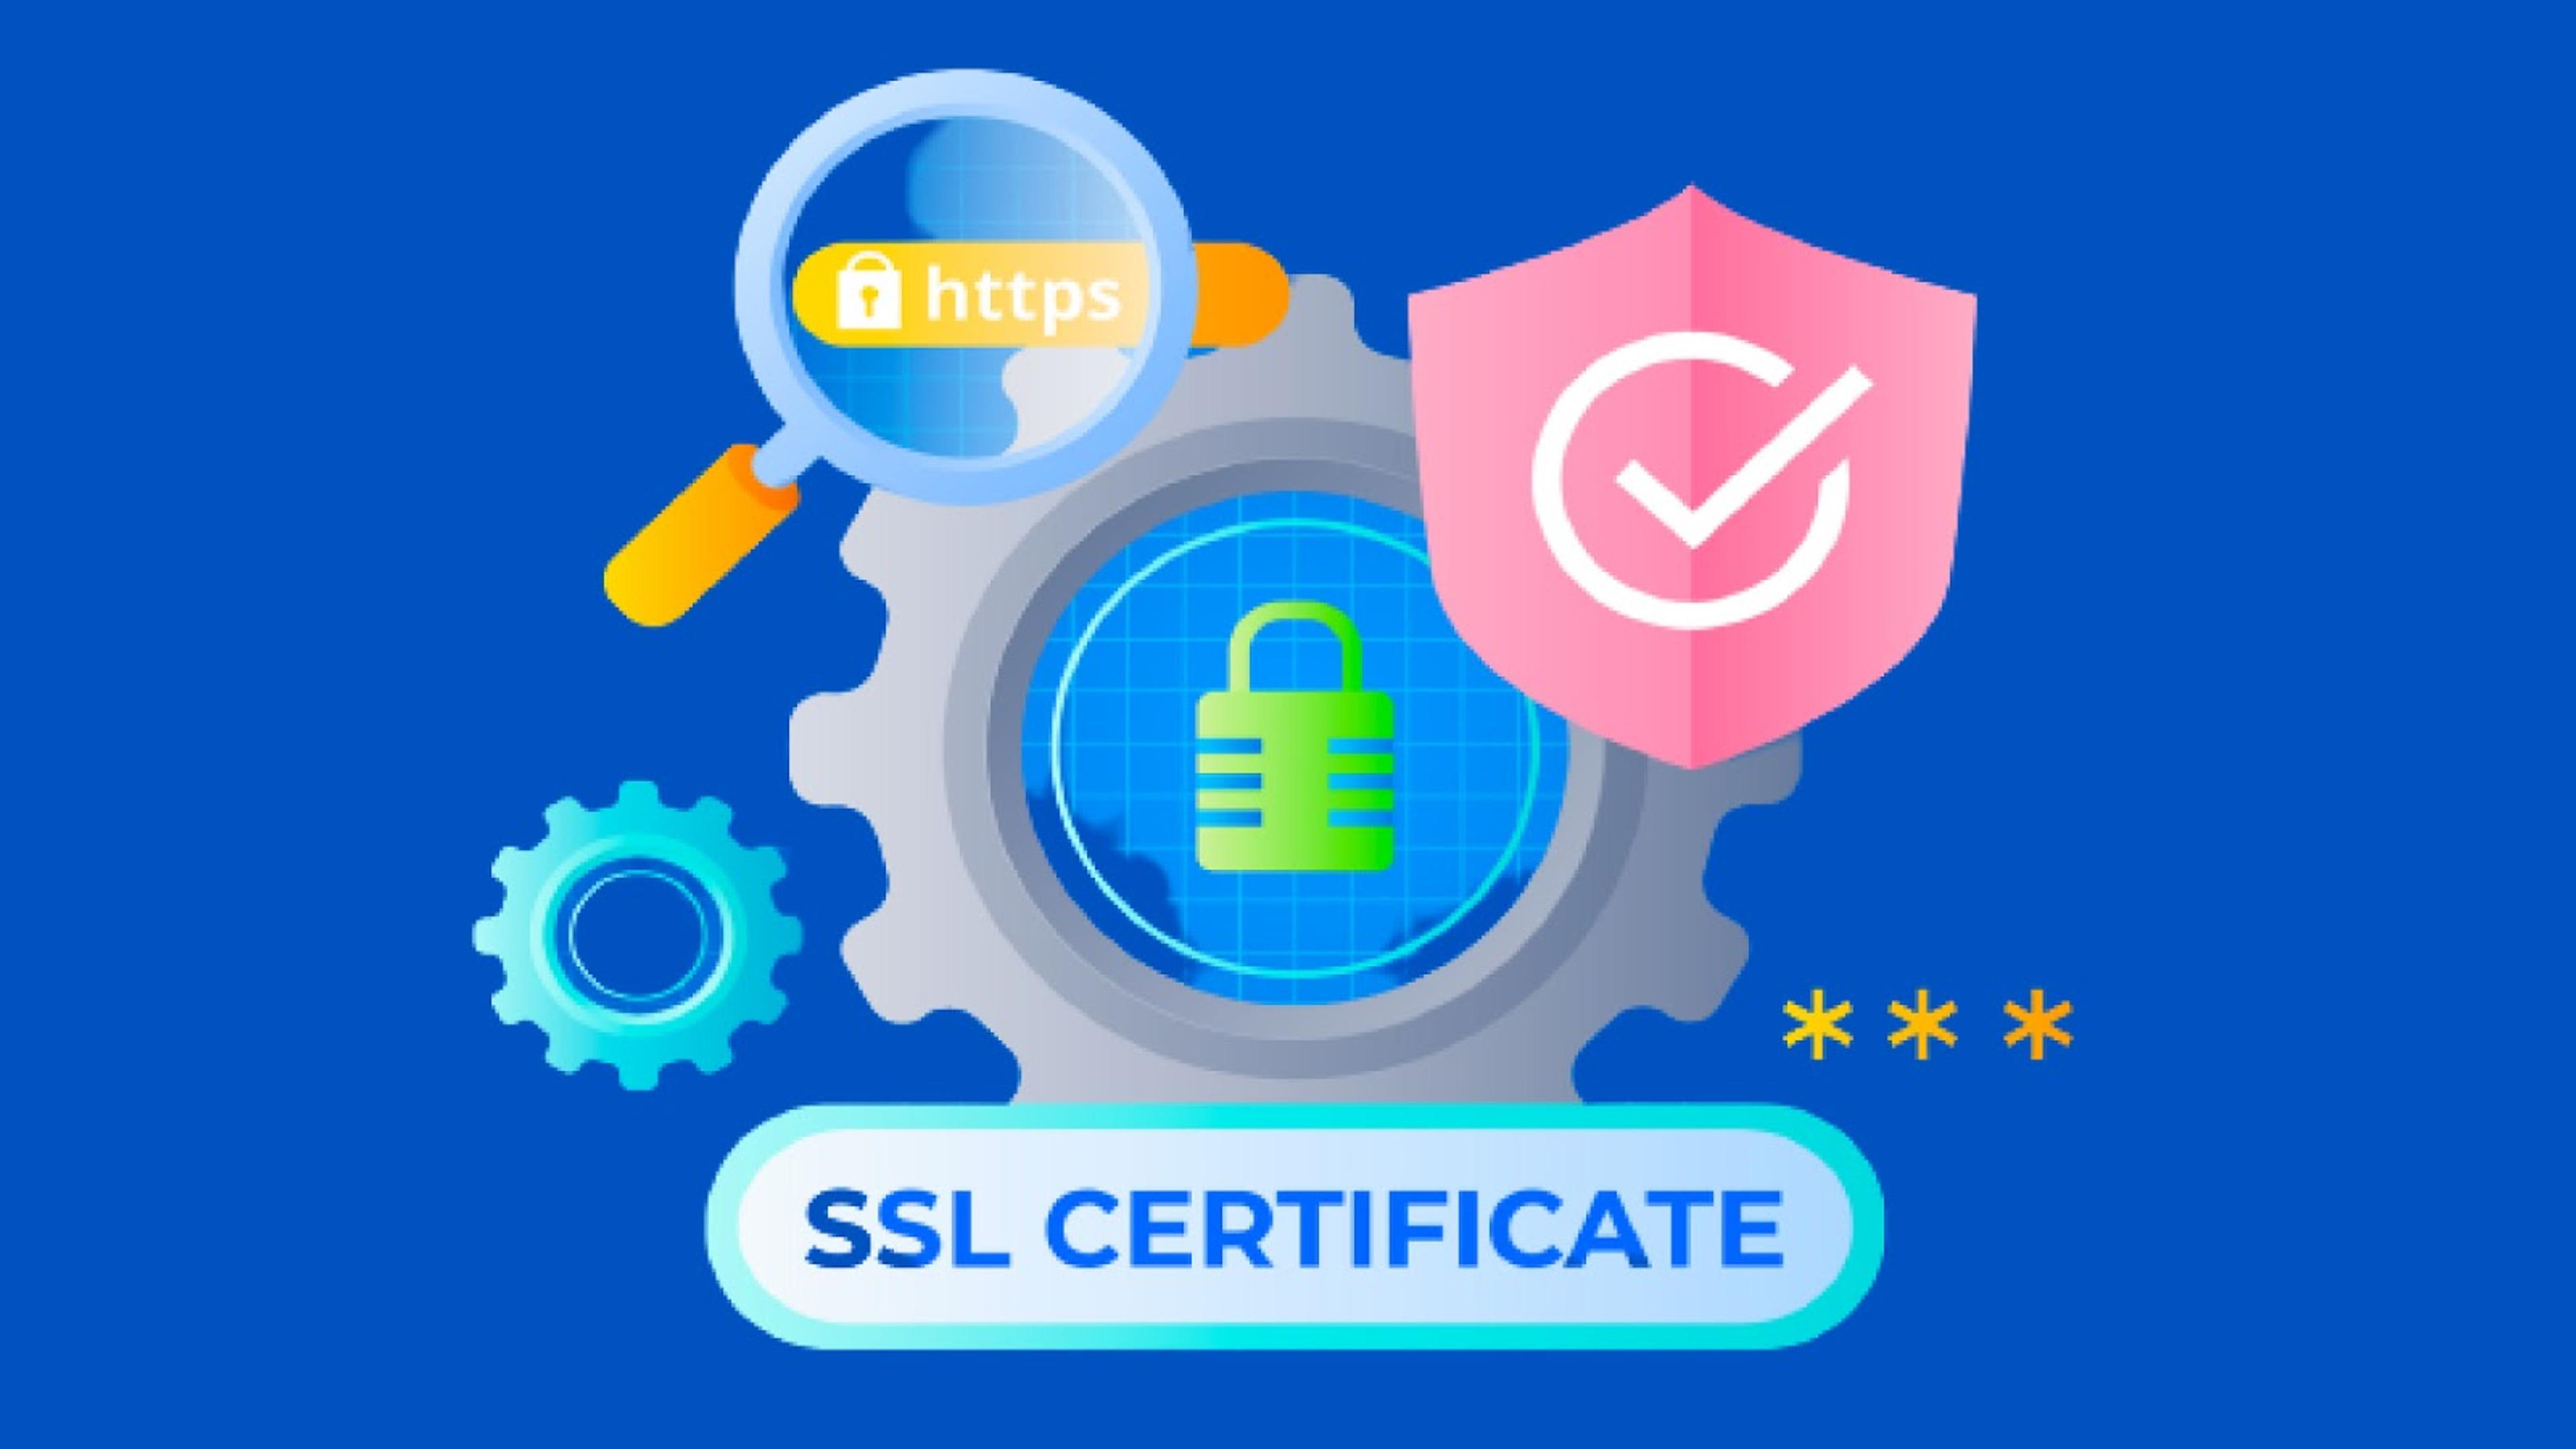 What Is an SSL Certificate?